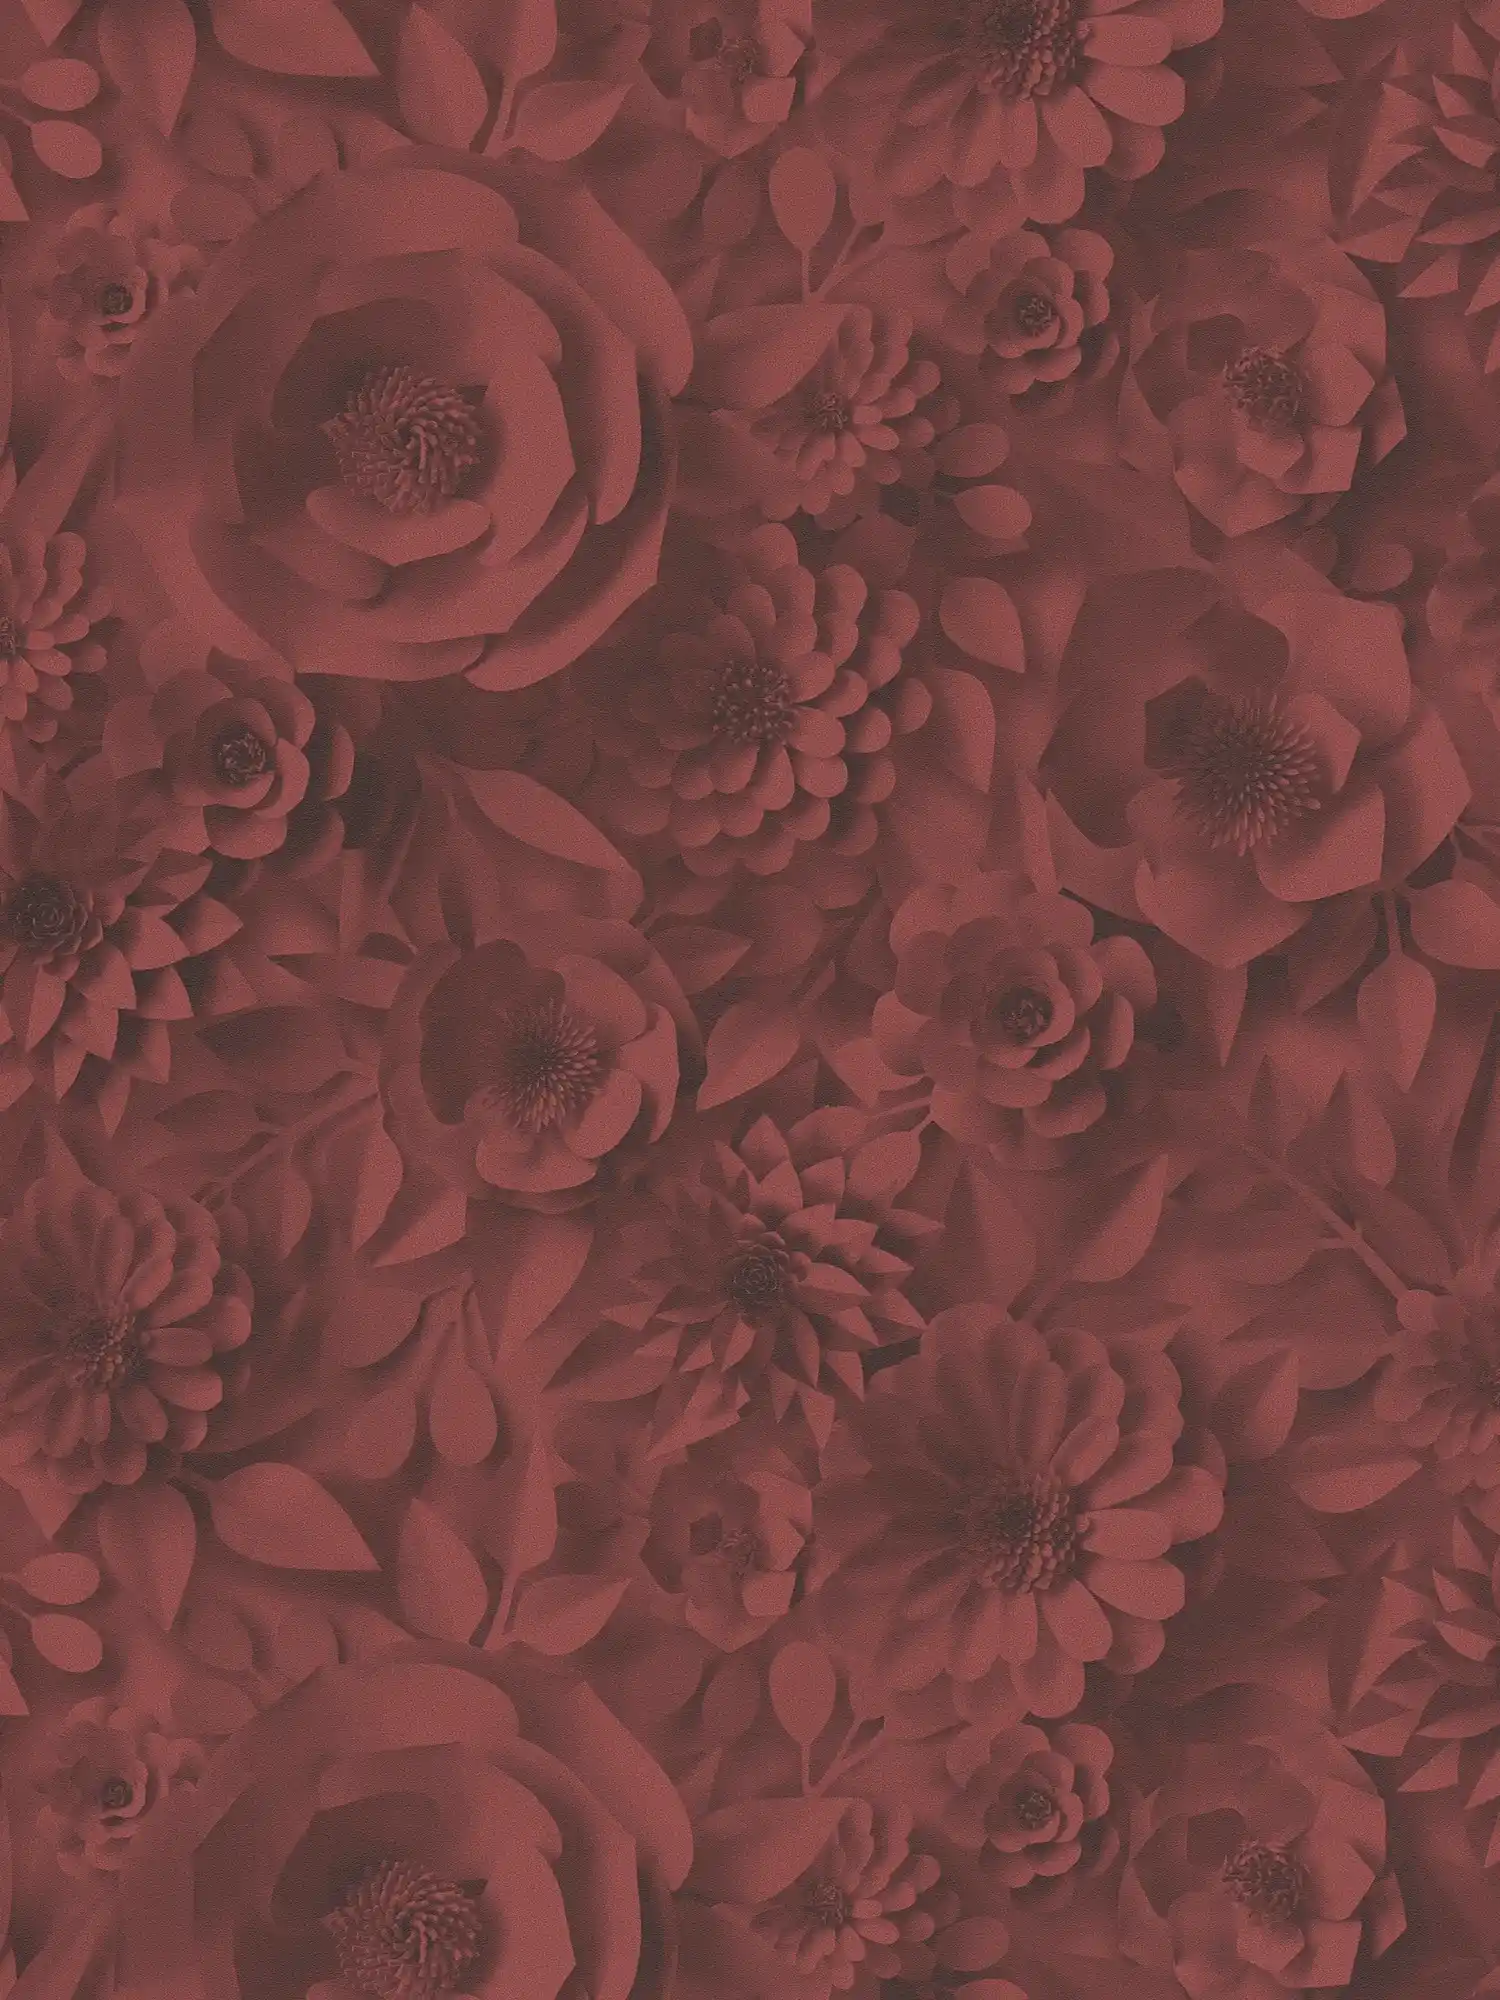 3D wallpaper with paper flowers, graphic floral pattern - red
